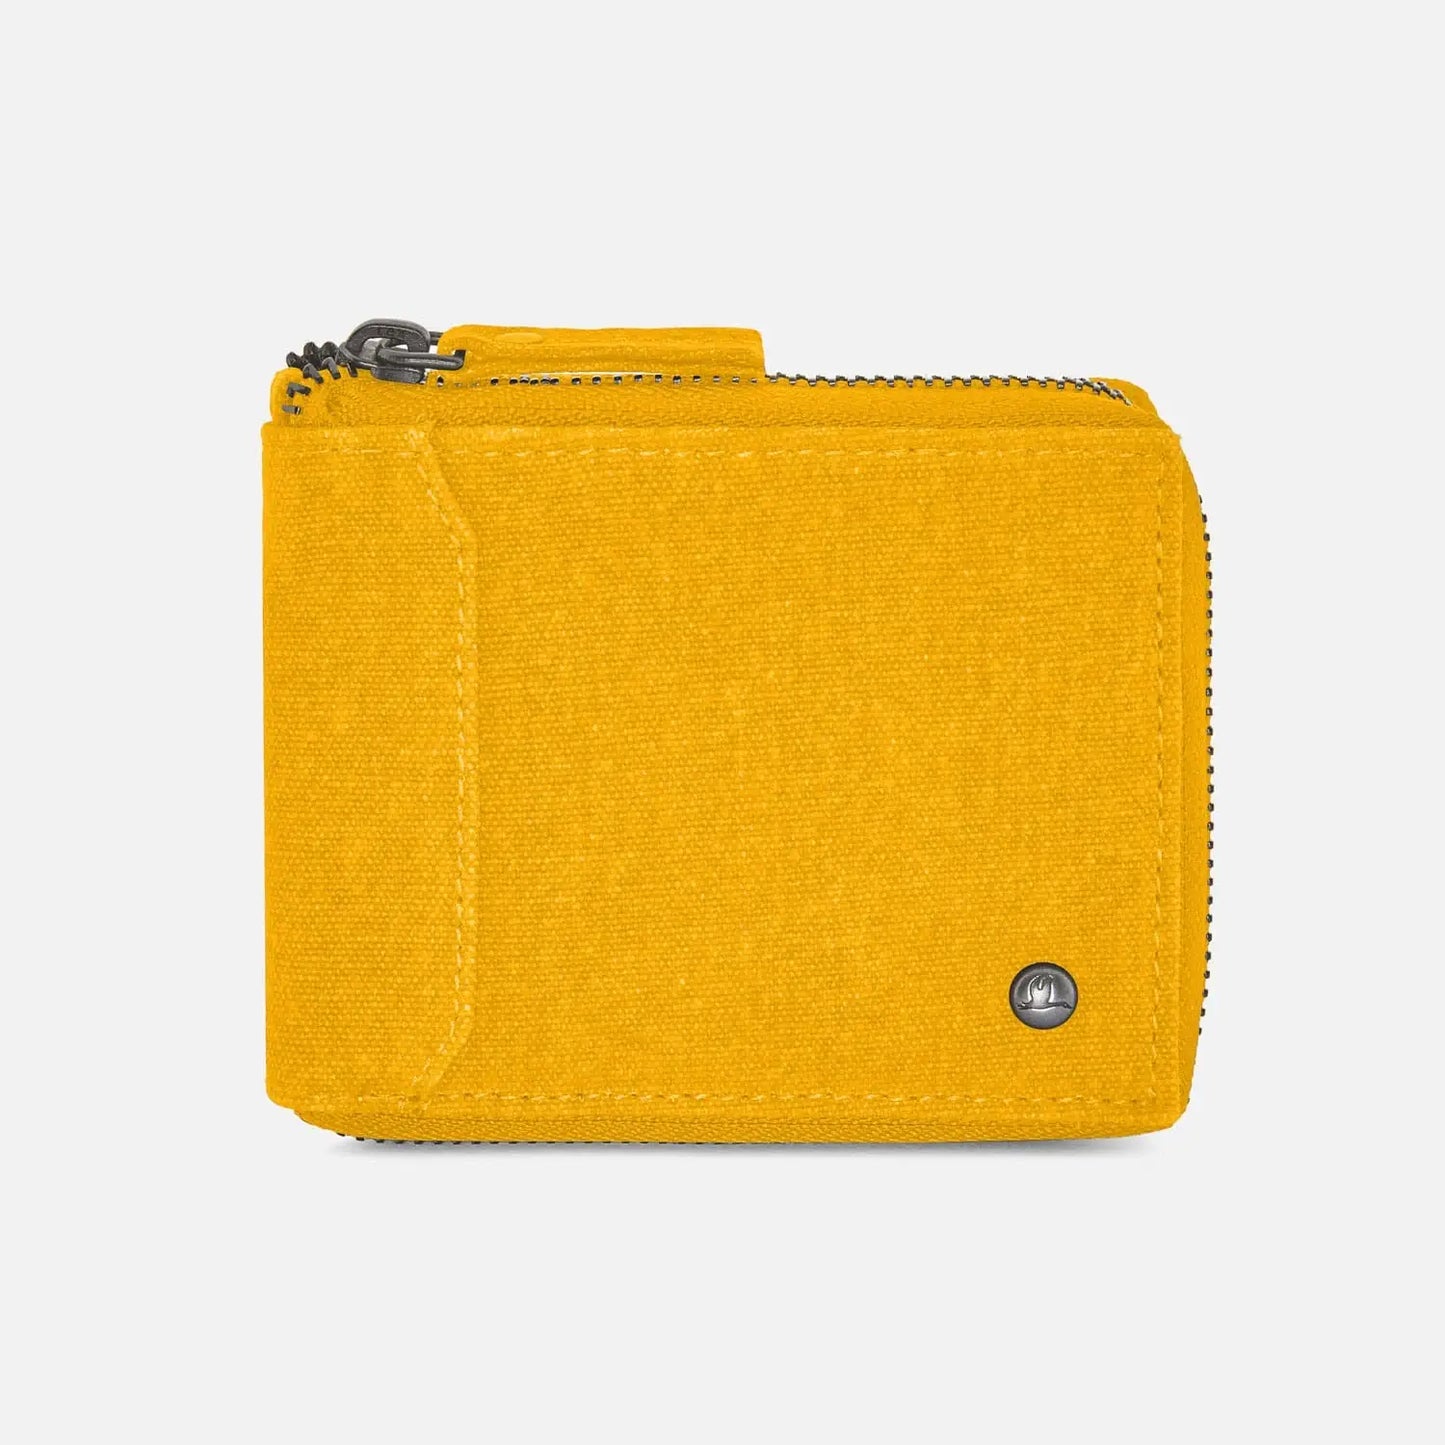 Cora + Spink Almost Square Wallet It's Yellow. Vegan wallet. Cora and Spink Wallet. Cora and Spink